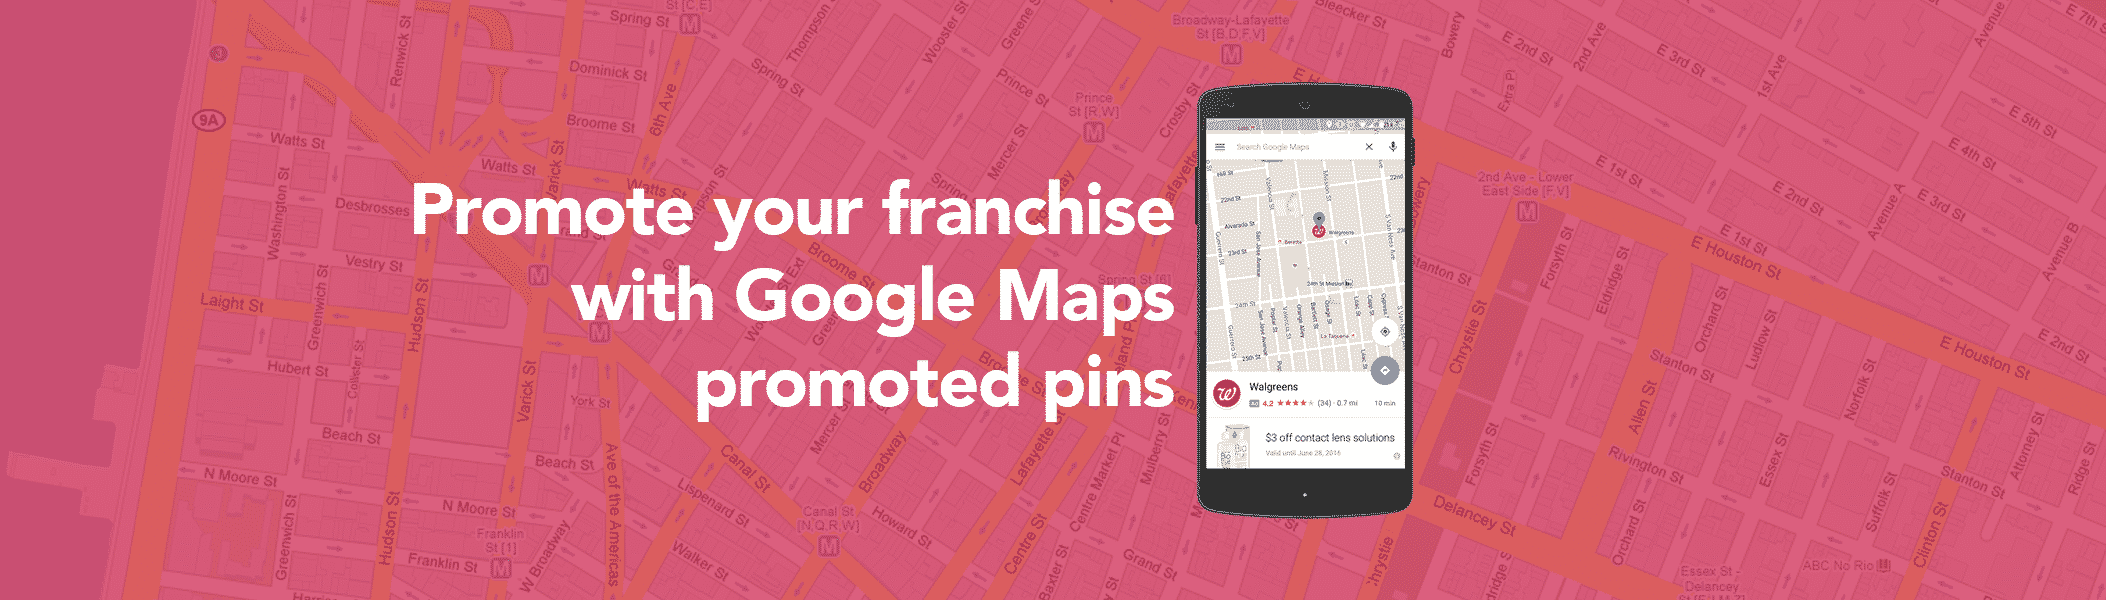 Google Maps promoted pins for franchises